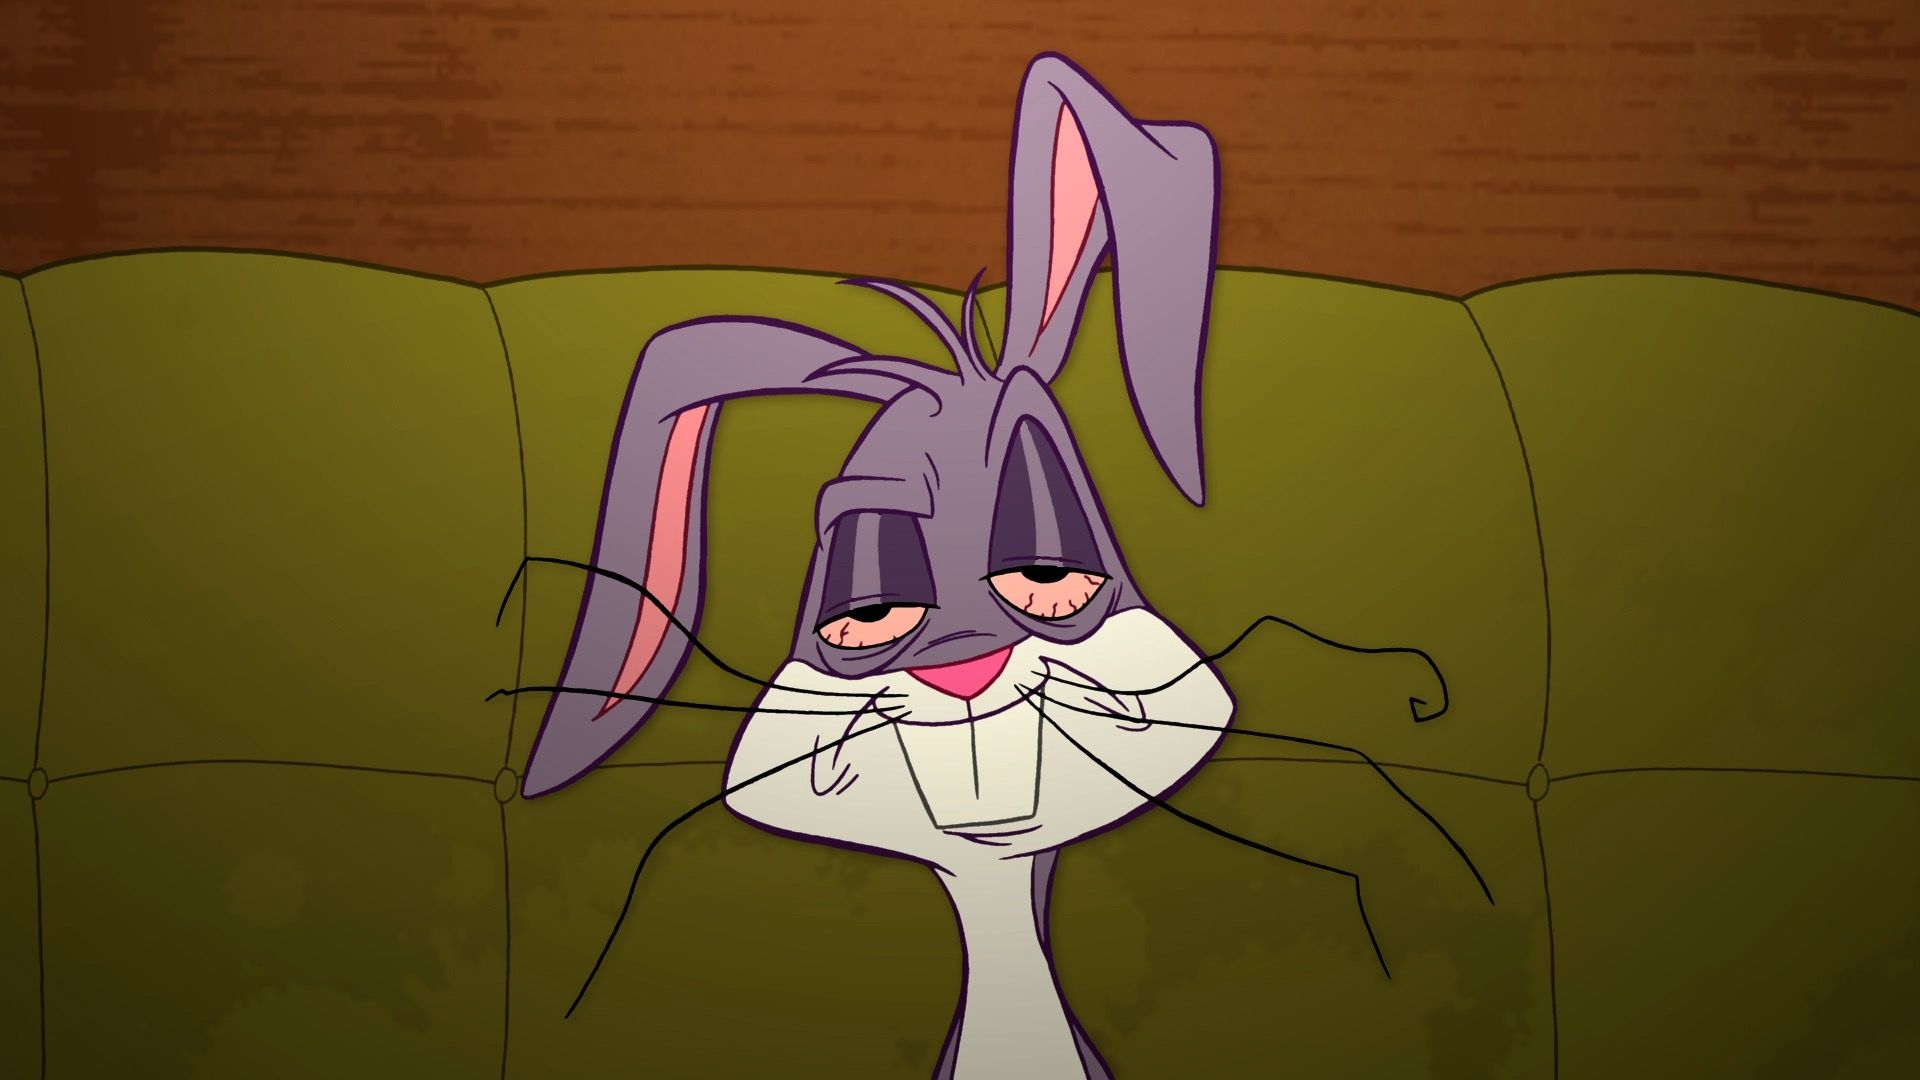 Wallpaper Stoned - Bugs Bunny Drug , HD Wallpaper & Backgrounds